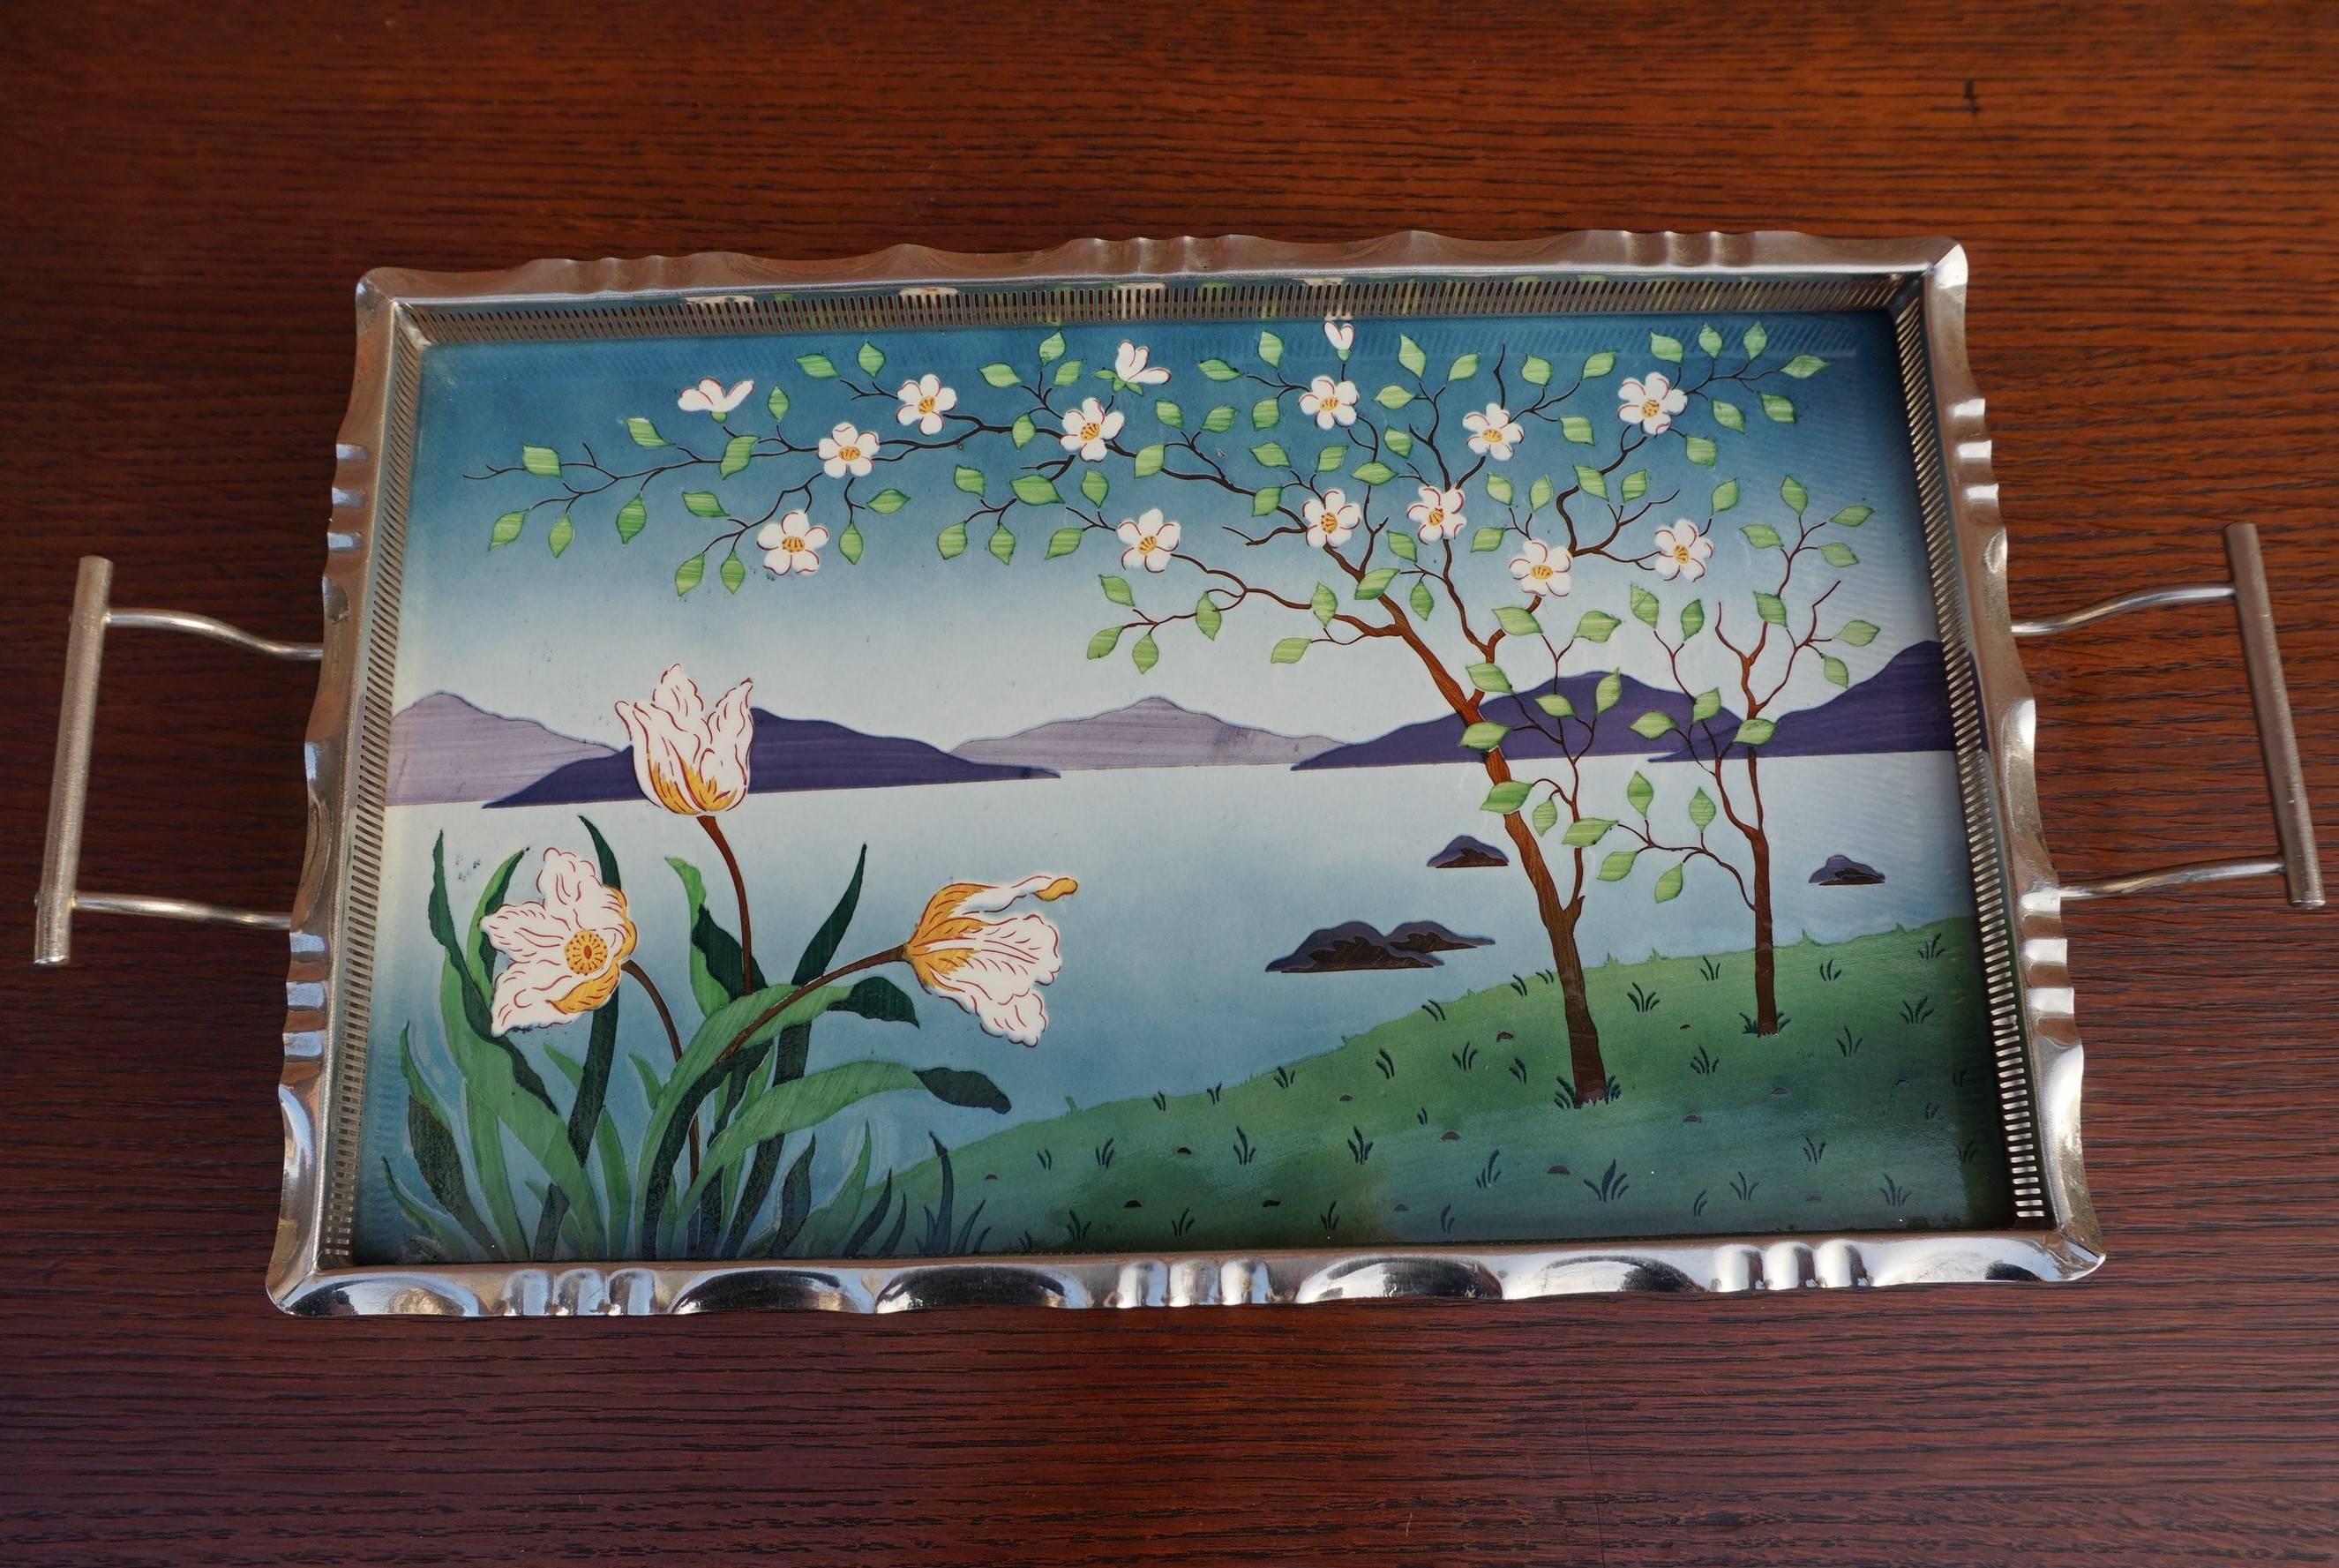 Rare Arts and Crafts tray with stunning and serene landscape.

The beauty of early 20th century Arts and Crafts home accessories is that they are almost always works of art in their own right. These antiques were not made hastily, they were not made